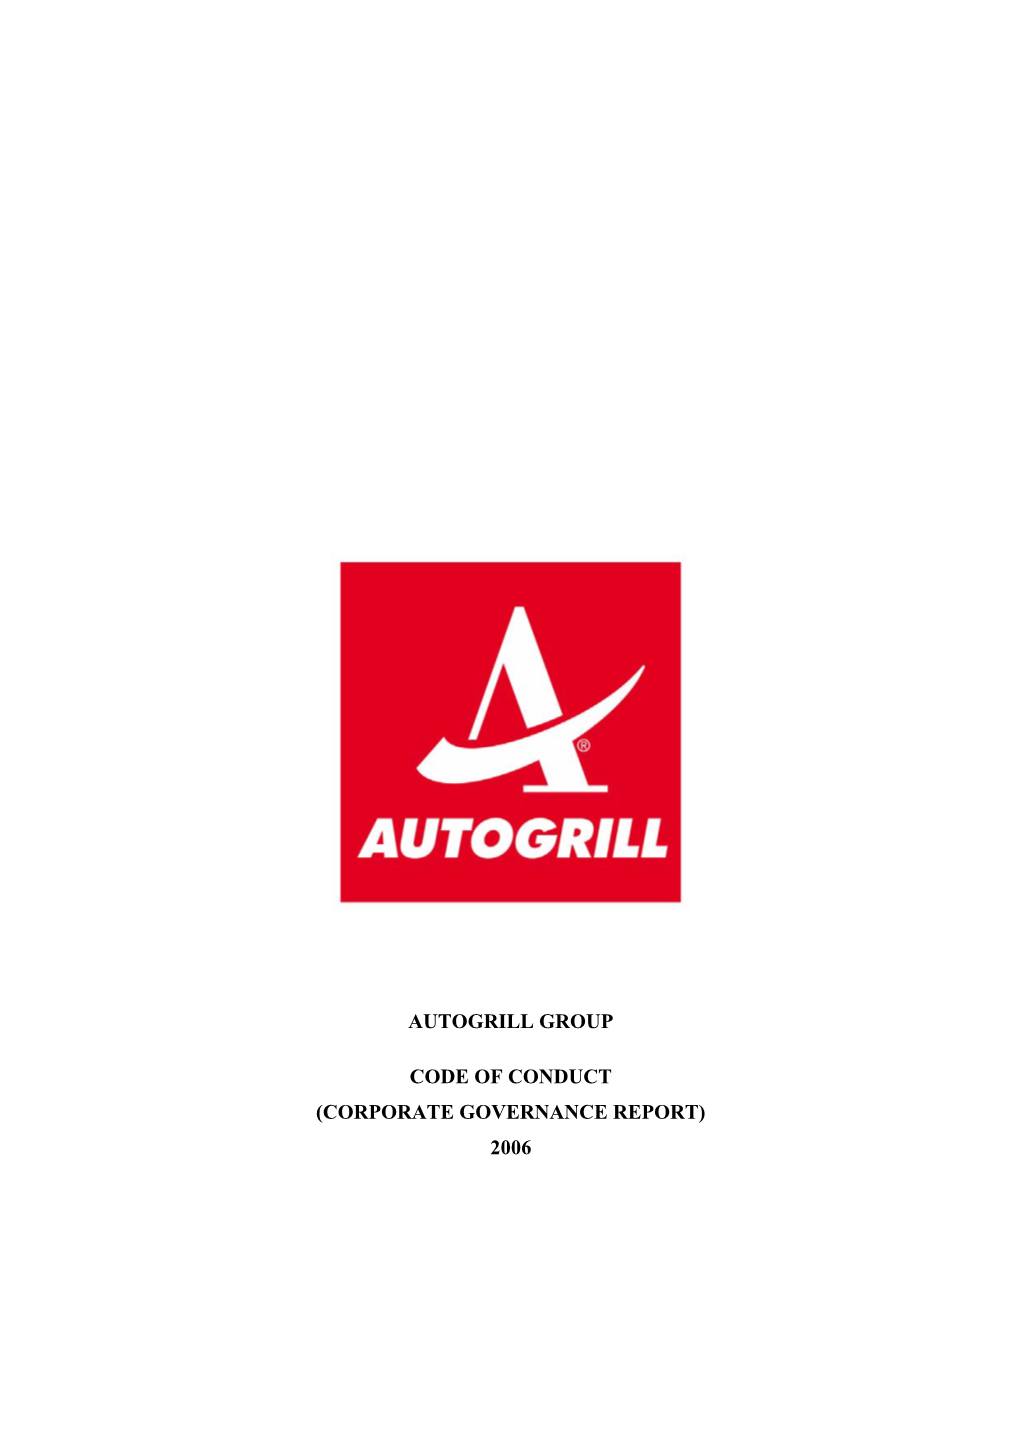 Autogrill Group Code of Conduct (Corporate